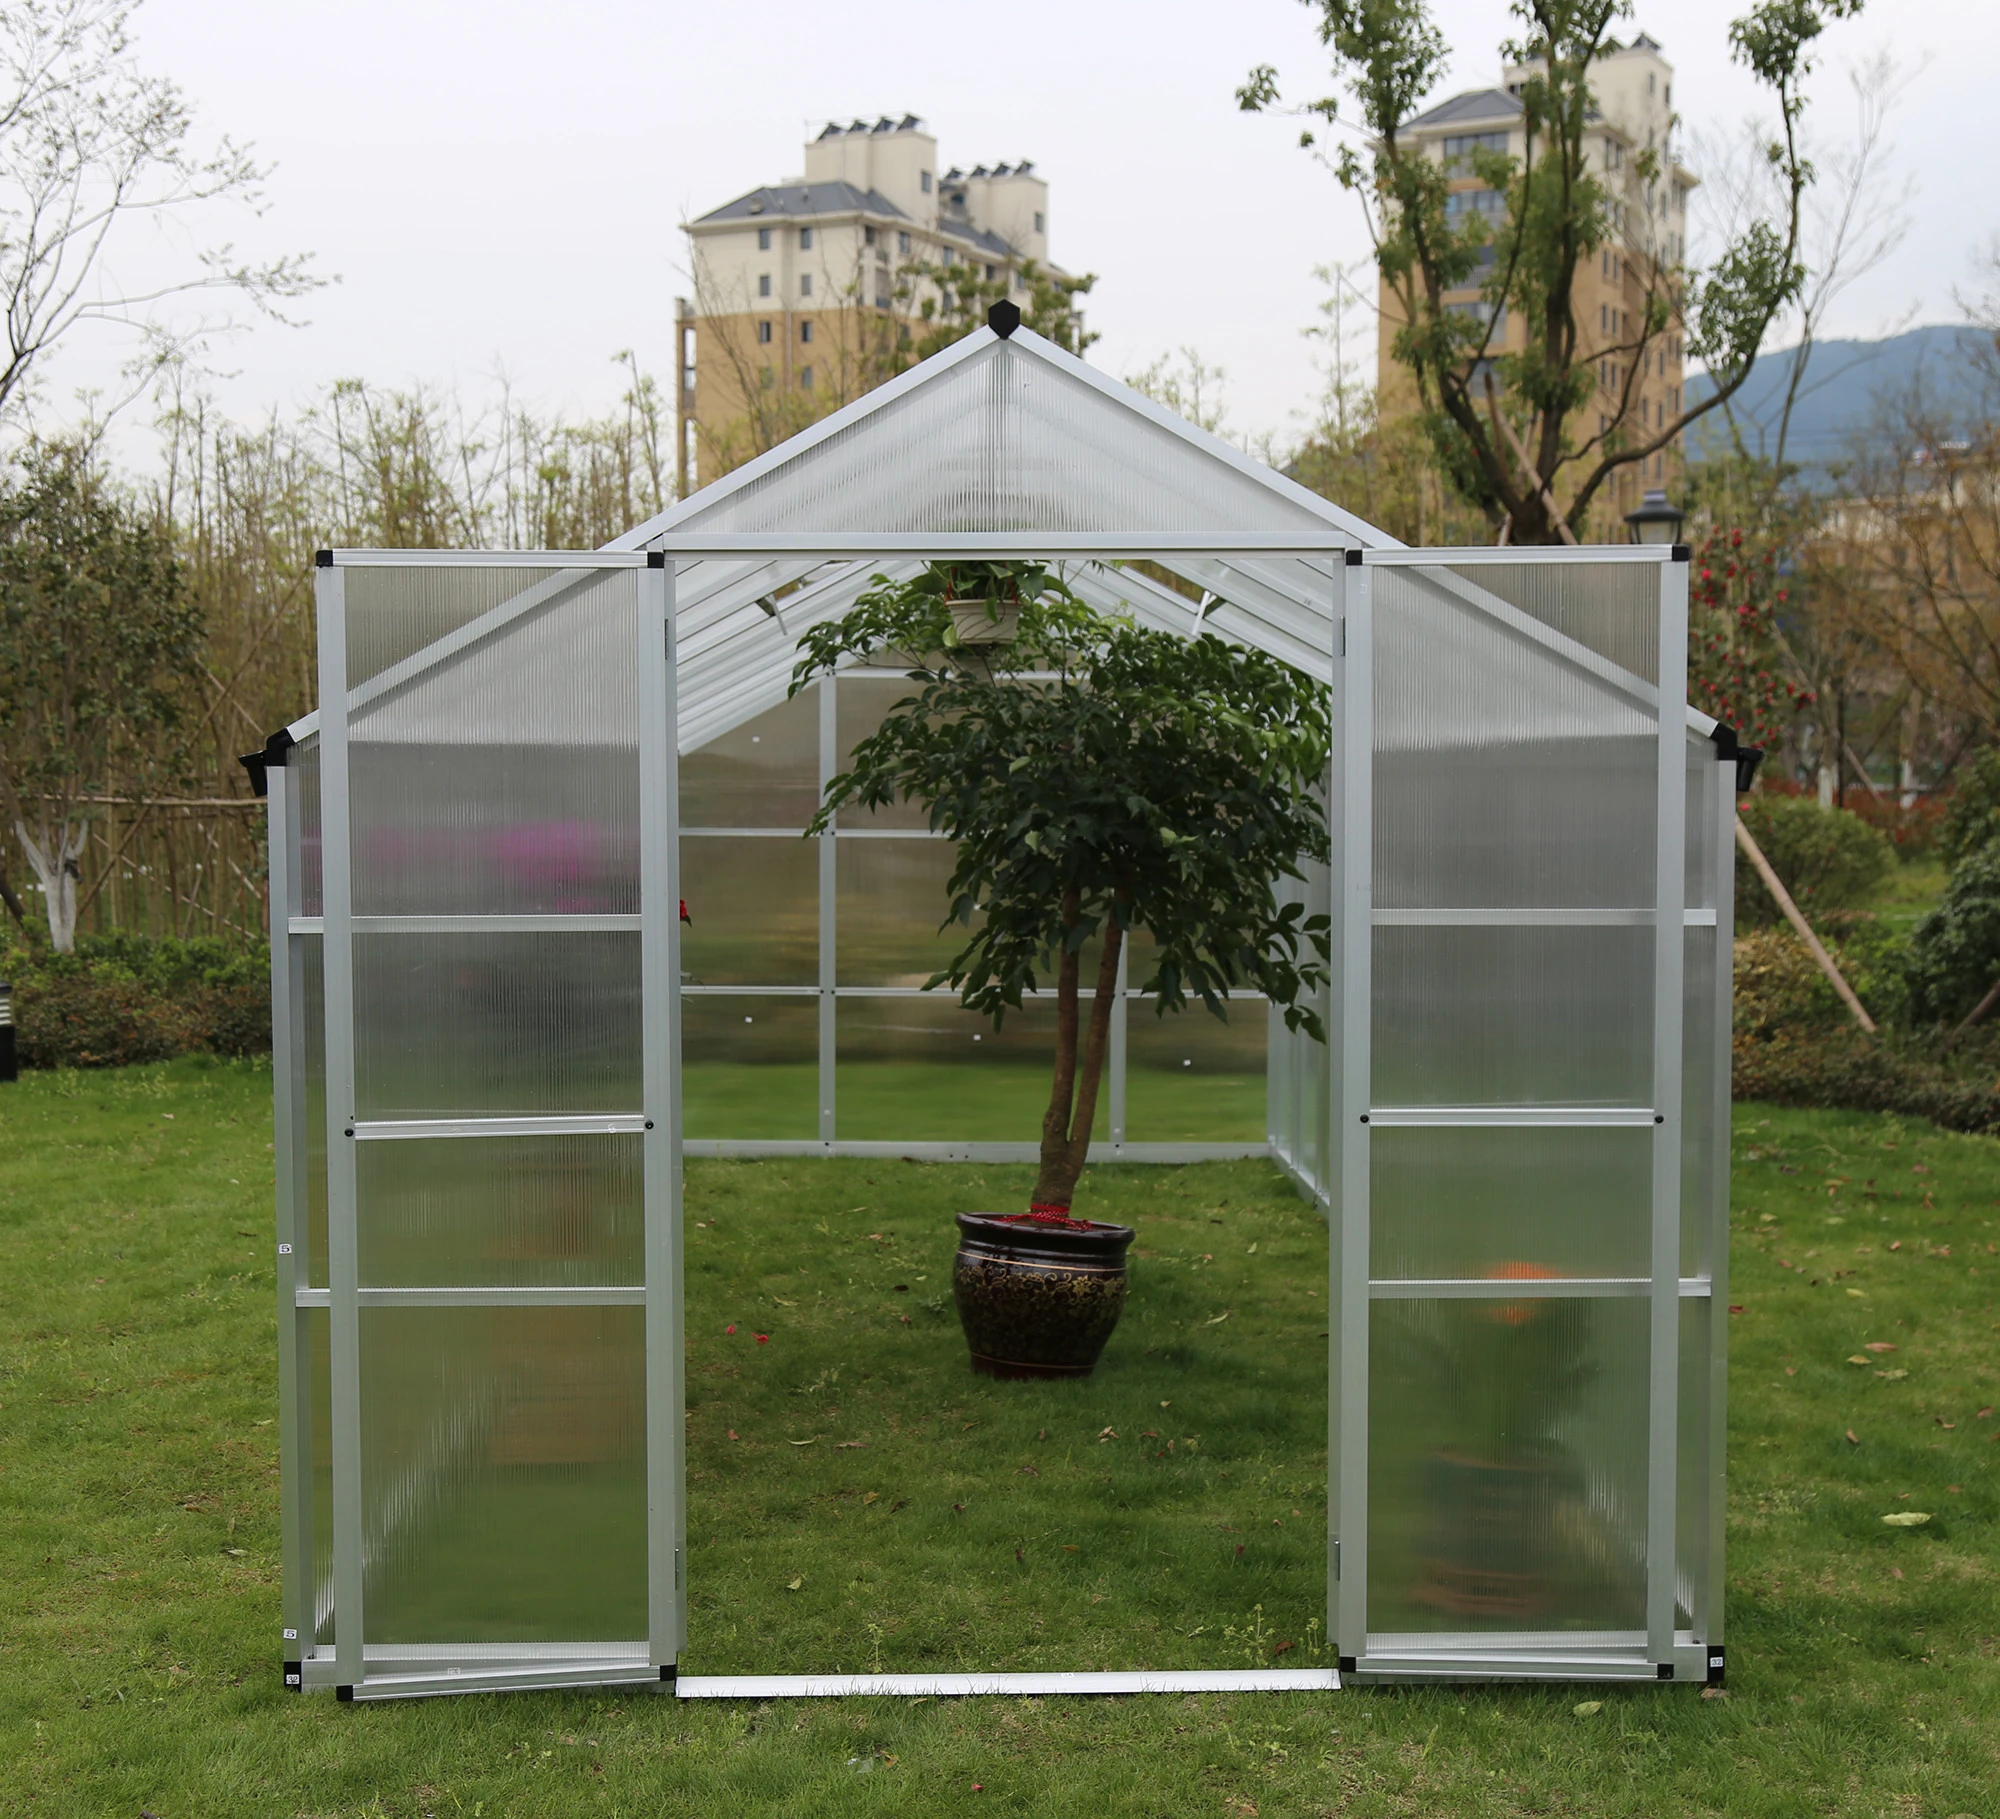 Walk-in Greenhouse Plant Growing Tent Large Green Garden Hot House with Adjustable Roof Vent, Rain Gutters Heavy Duty